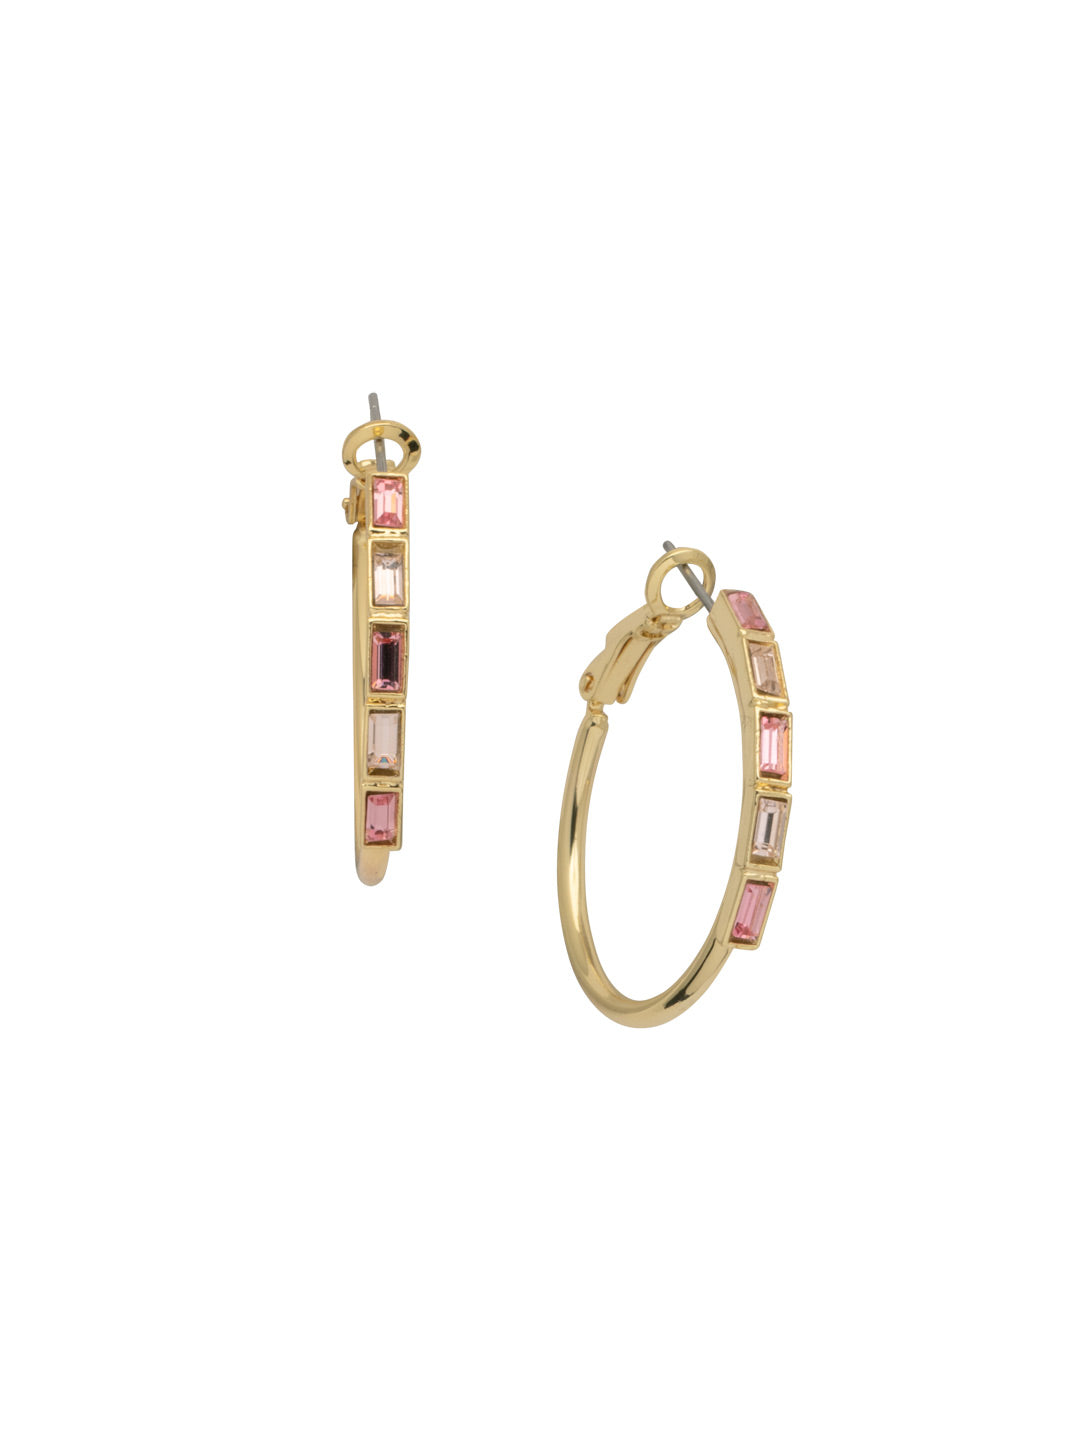 Jill Hoop Earring - EEY23BGFSK - <p>Square cut crystals embellish classic round hoops to create the trendy Jill Hoop Earrings. From Sorrelli's First Kiss collection in our Bright Gold-tone finish.</p>